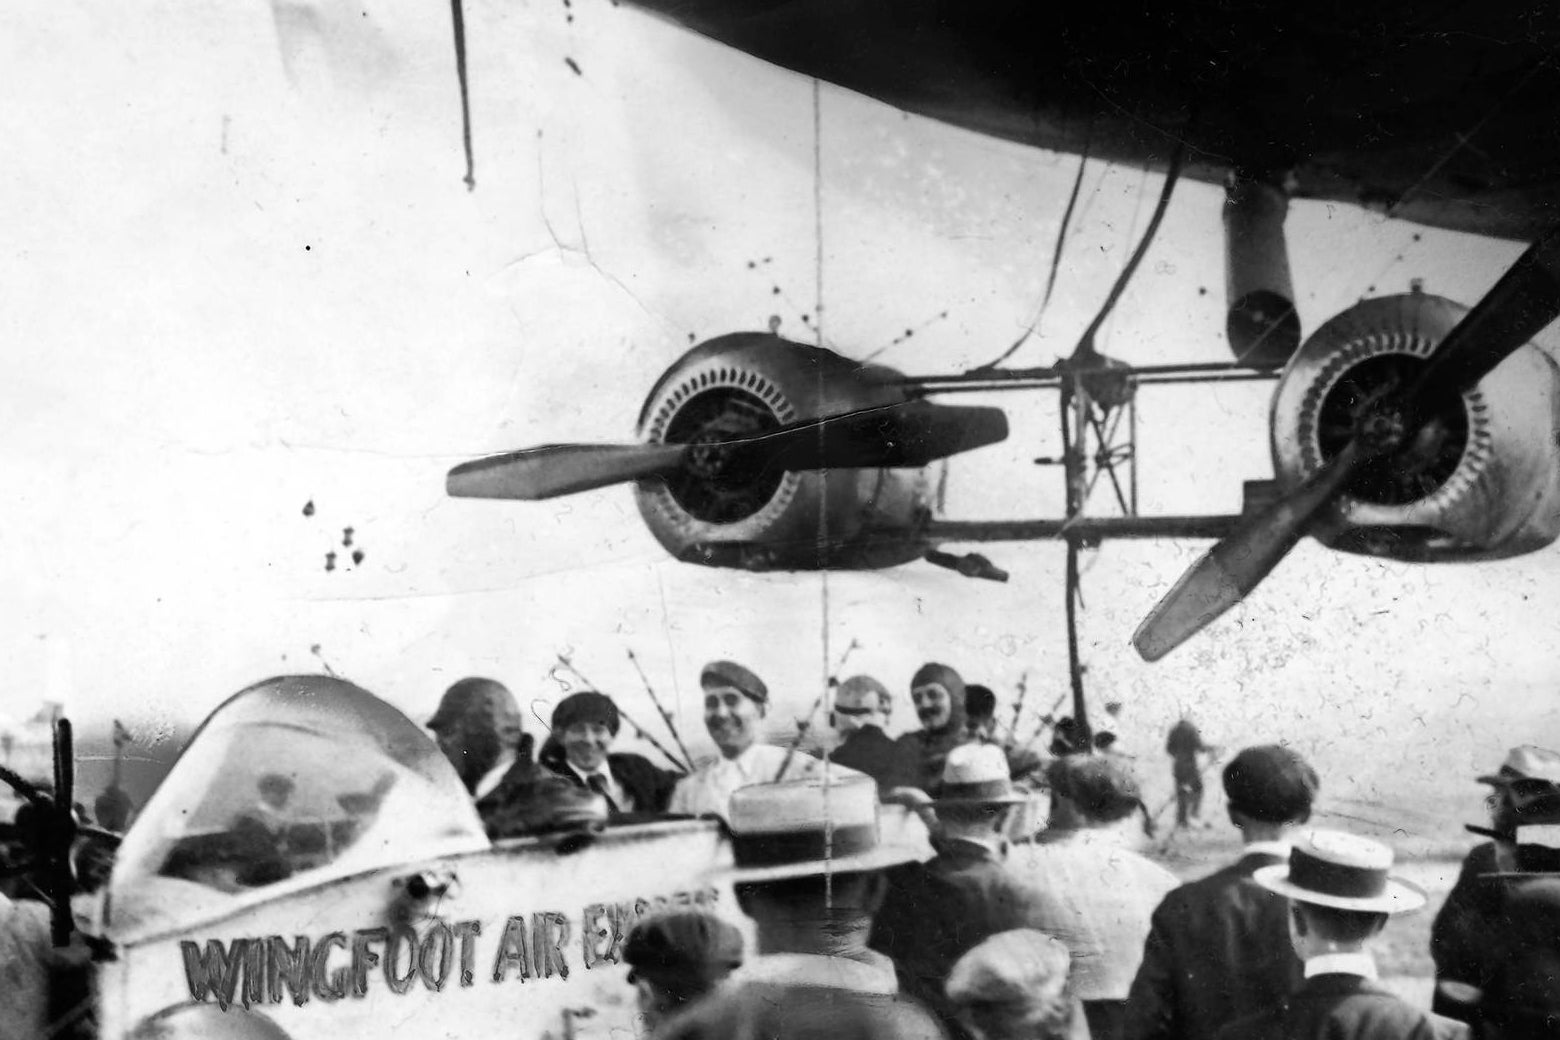 The open gondola of a 1910s blimp, flanked by two giant engines. Five smiling passengers sit in the gondola.